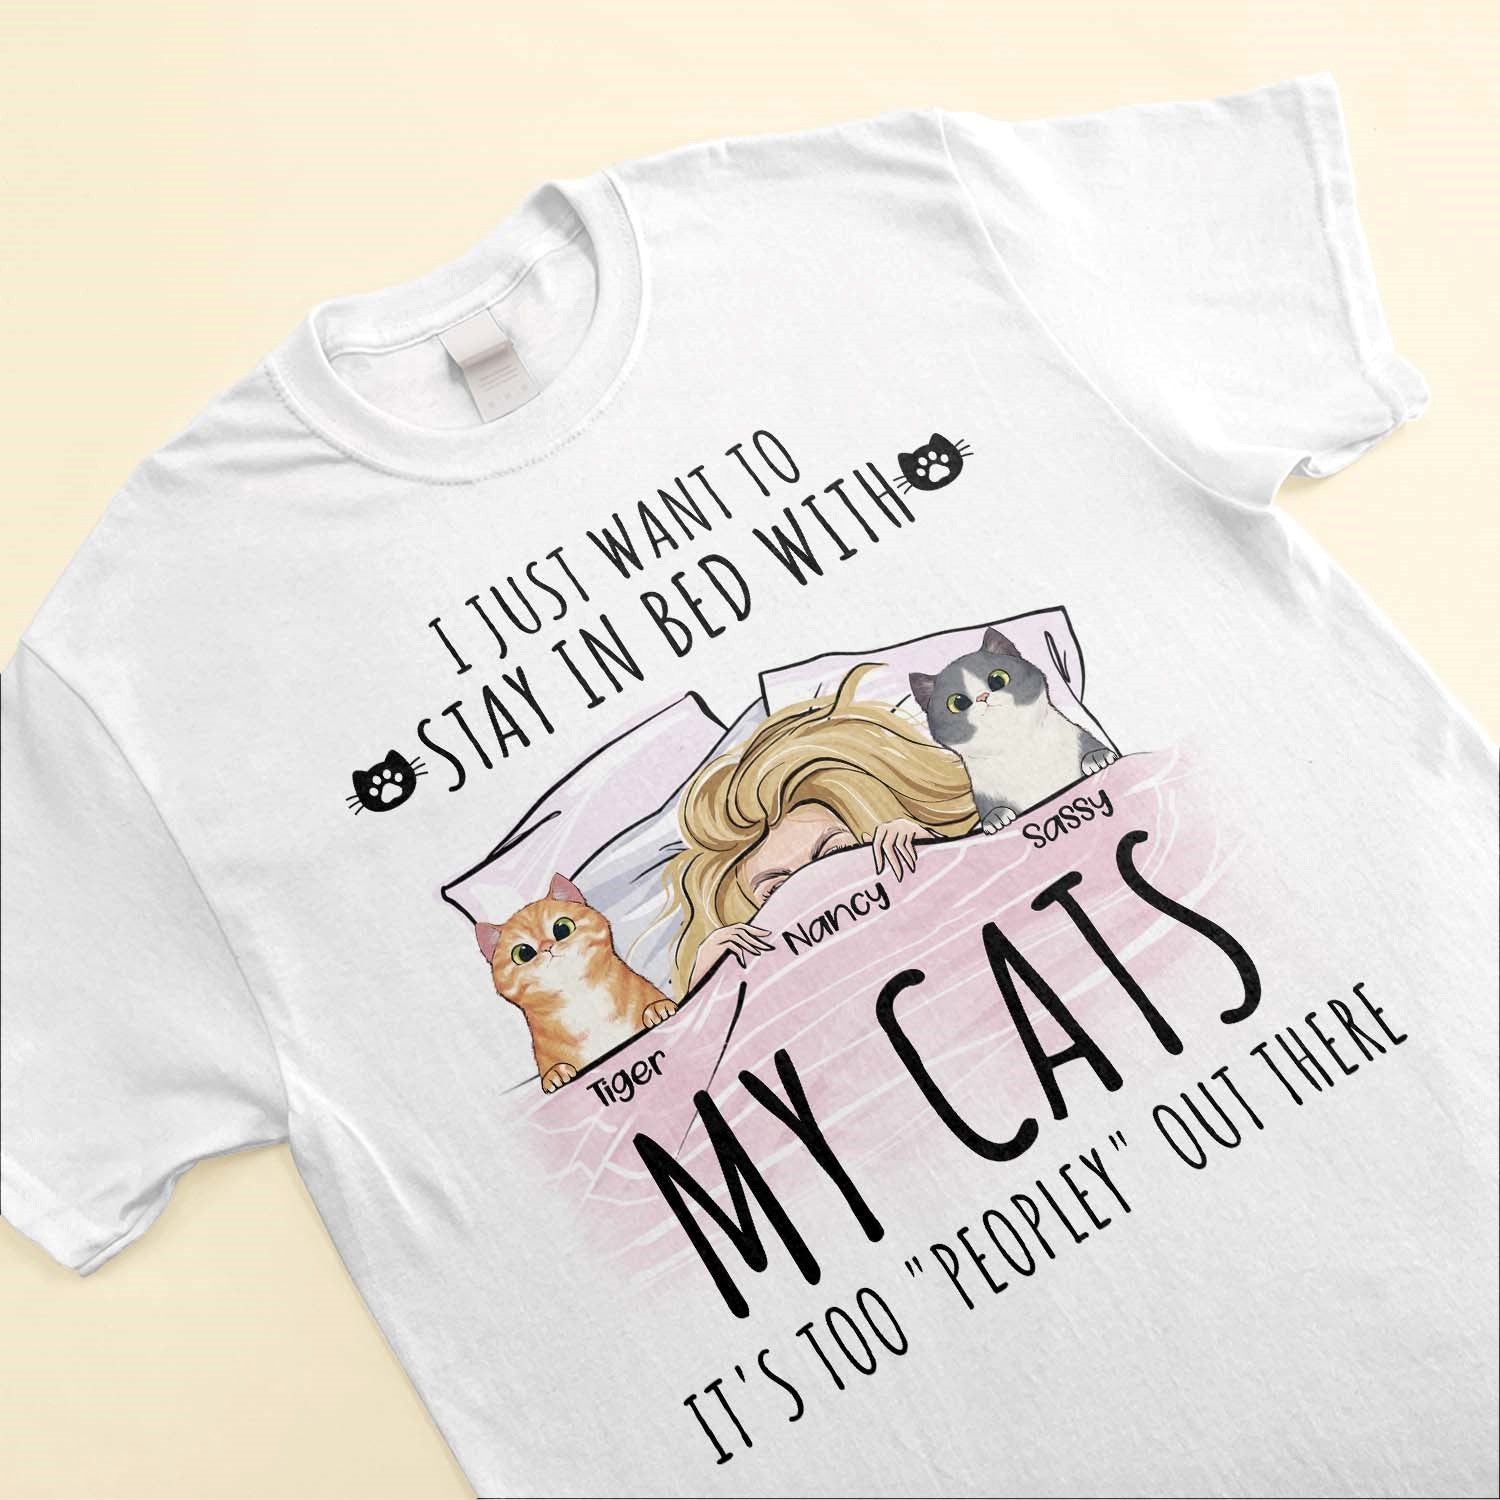 Stay In Bed With My Cats - Personalized Shirt - Gift For Cat Lovers, Cat Mom - Peeking Cats-Macorner